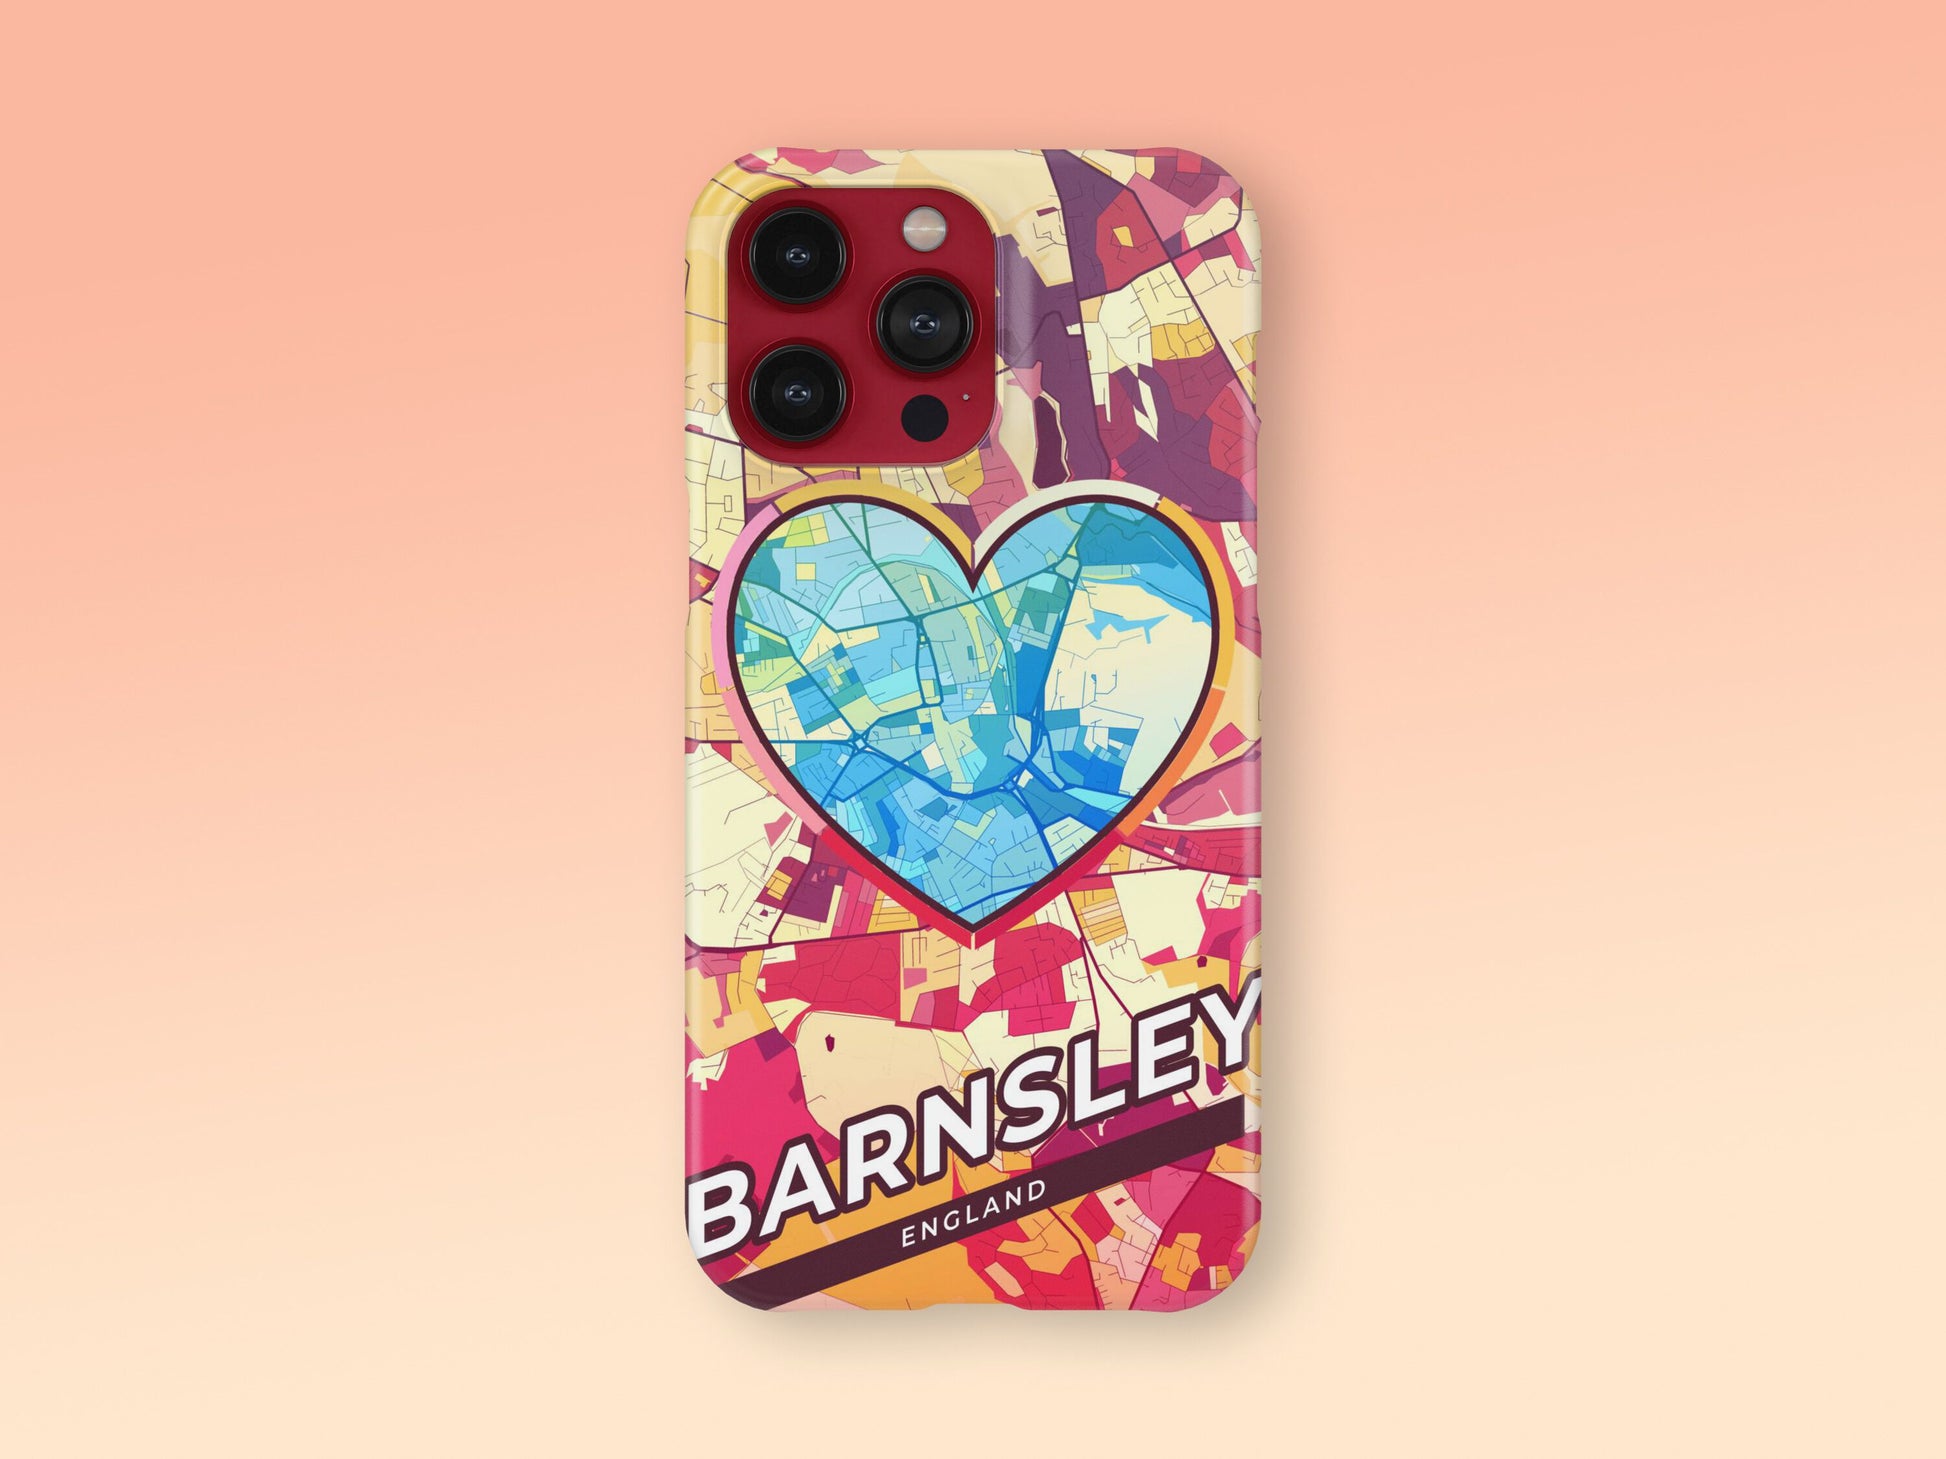 Barnsley England slim phone case with colorful icon. Birthday, wedding or housewarming gift. Couple match cases. 2